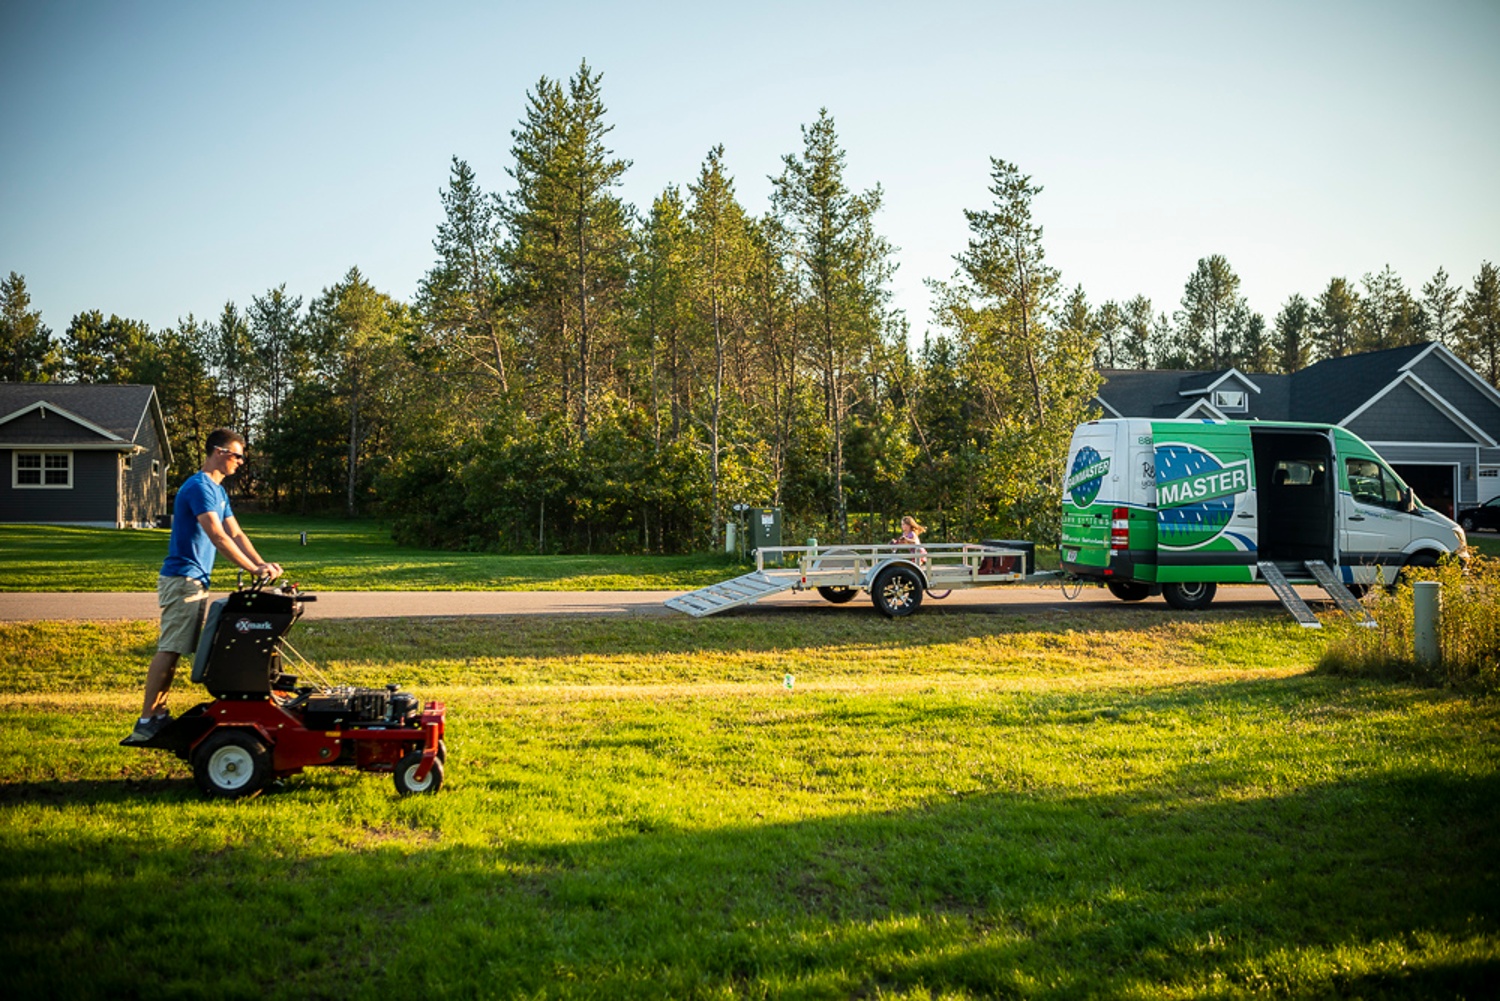 lawn care technician aerating a lawn with landscaping company truck in background